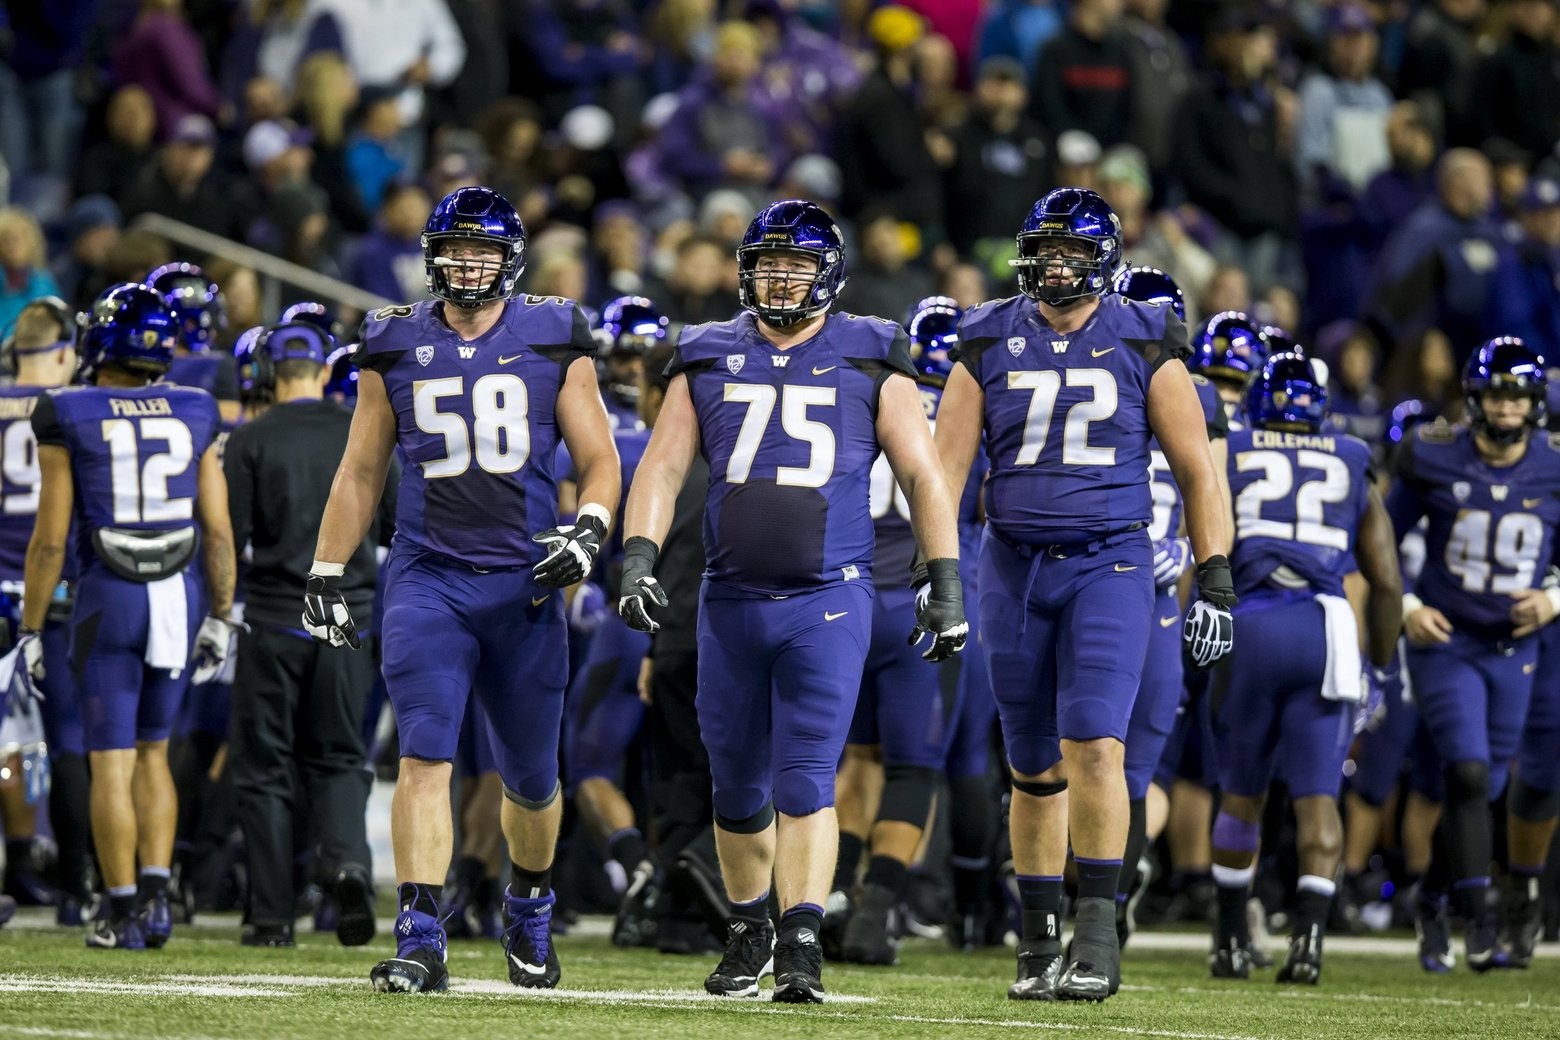 UW spring football preview Foundation in place for Huskies to boast